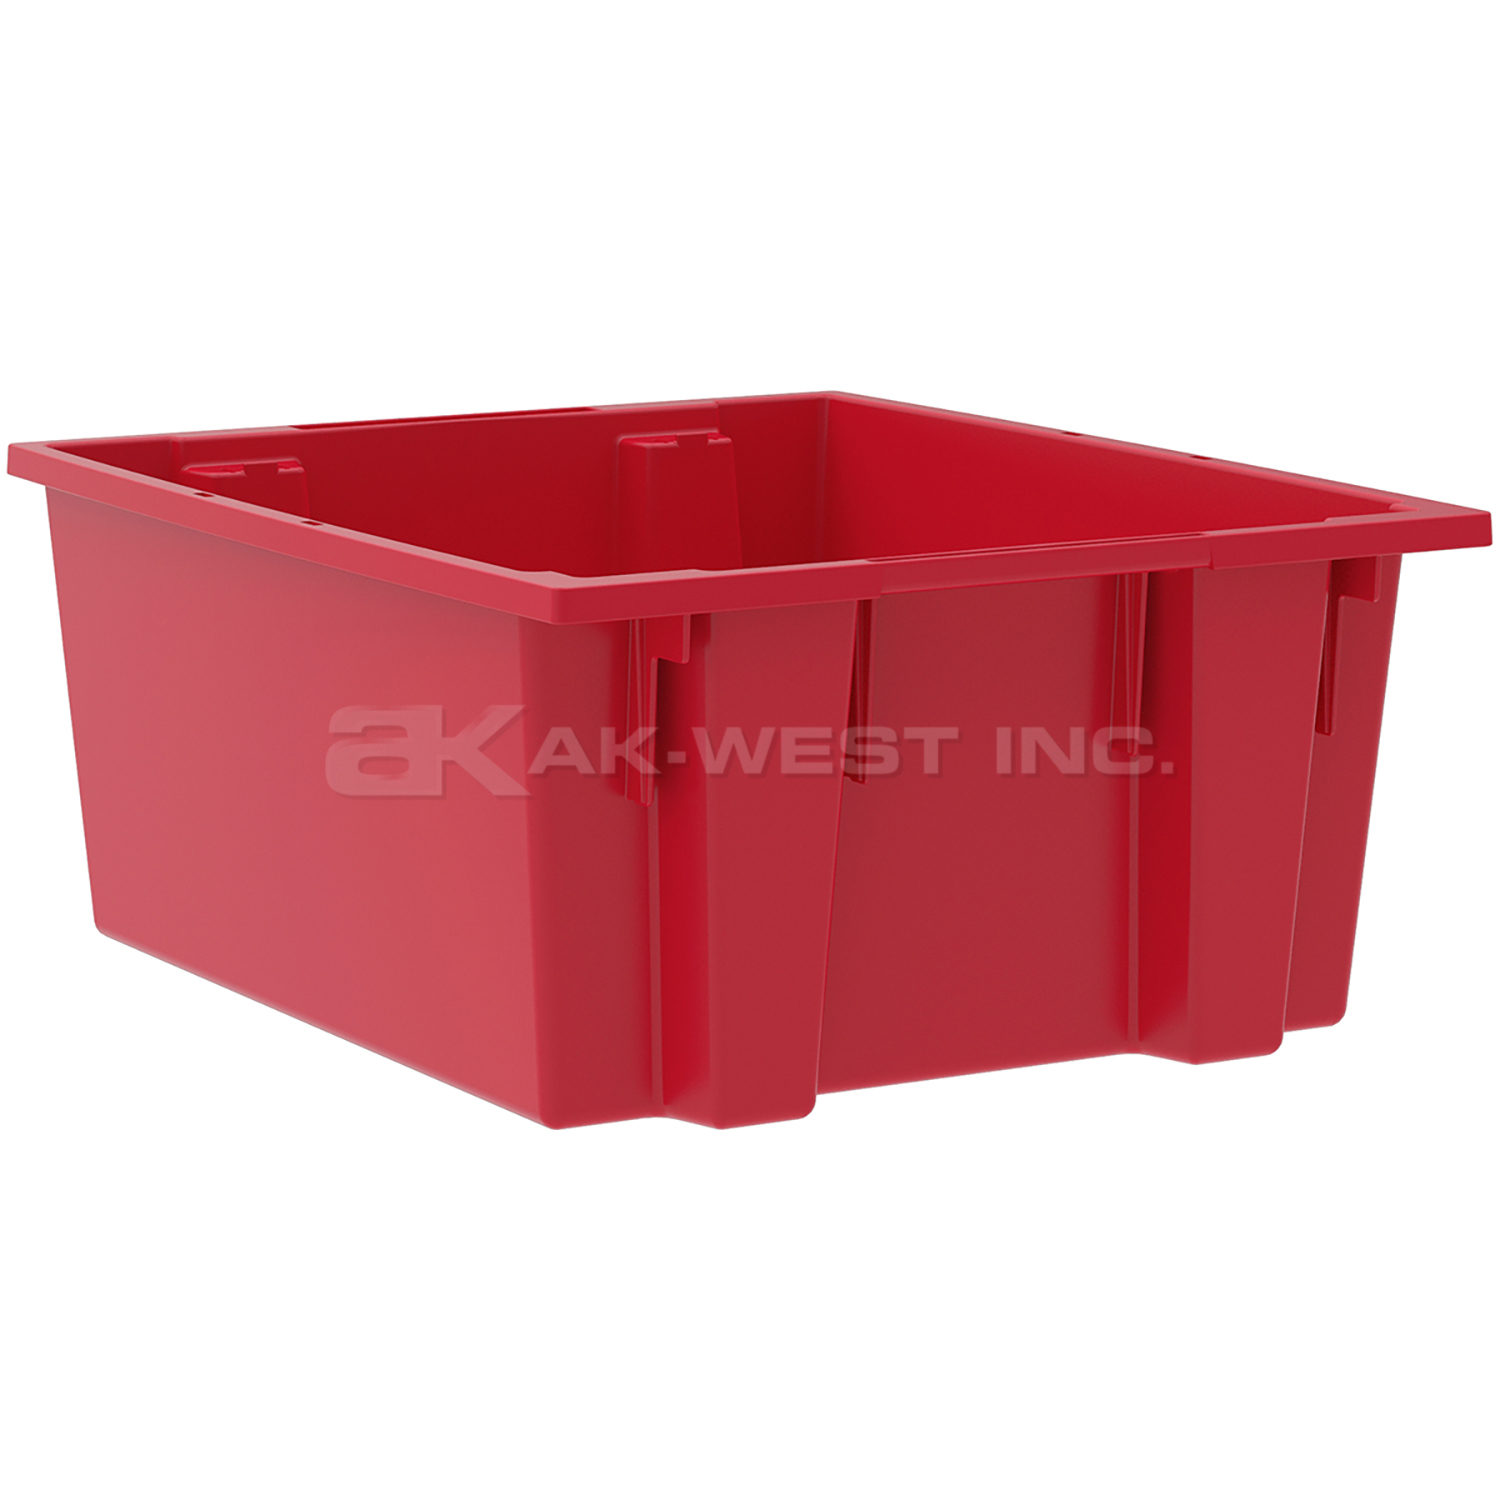 Red, 23-1/2" x 19-1/2" x 10" Nest and Stack Tote (3 Per Carton)